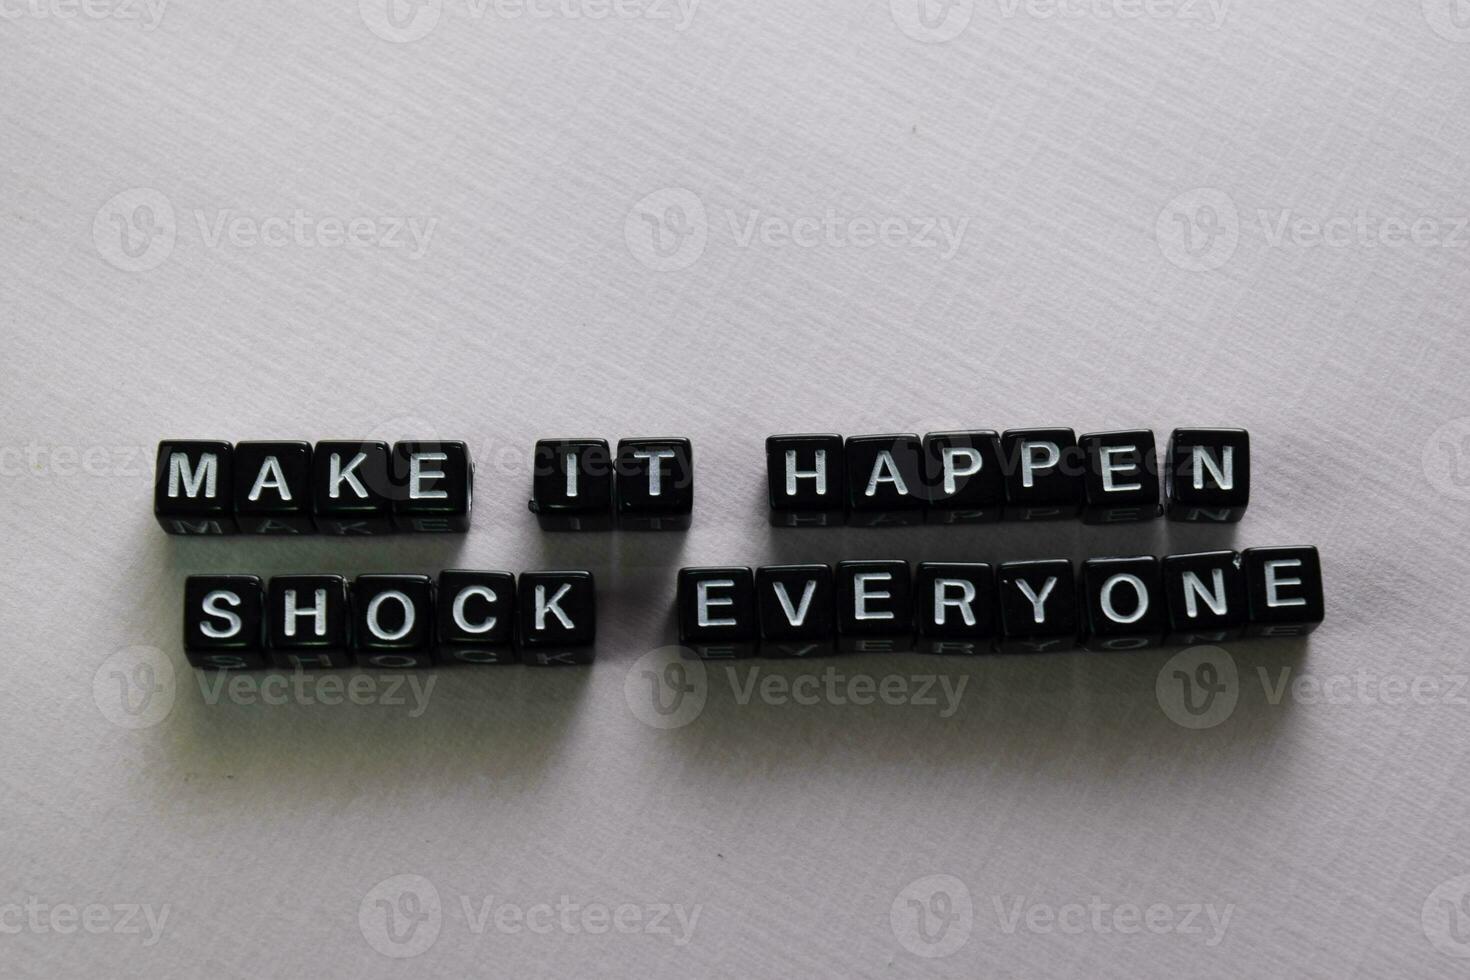 Make it happen shock everyone on wooden blocks. Motivation and inspiration concept photo